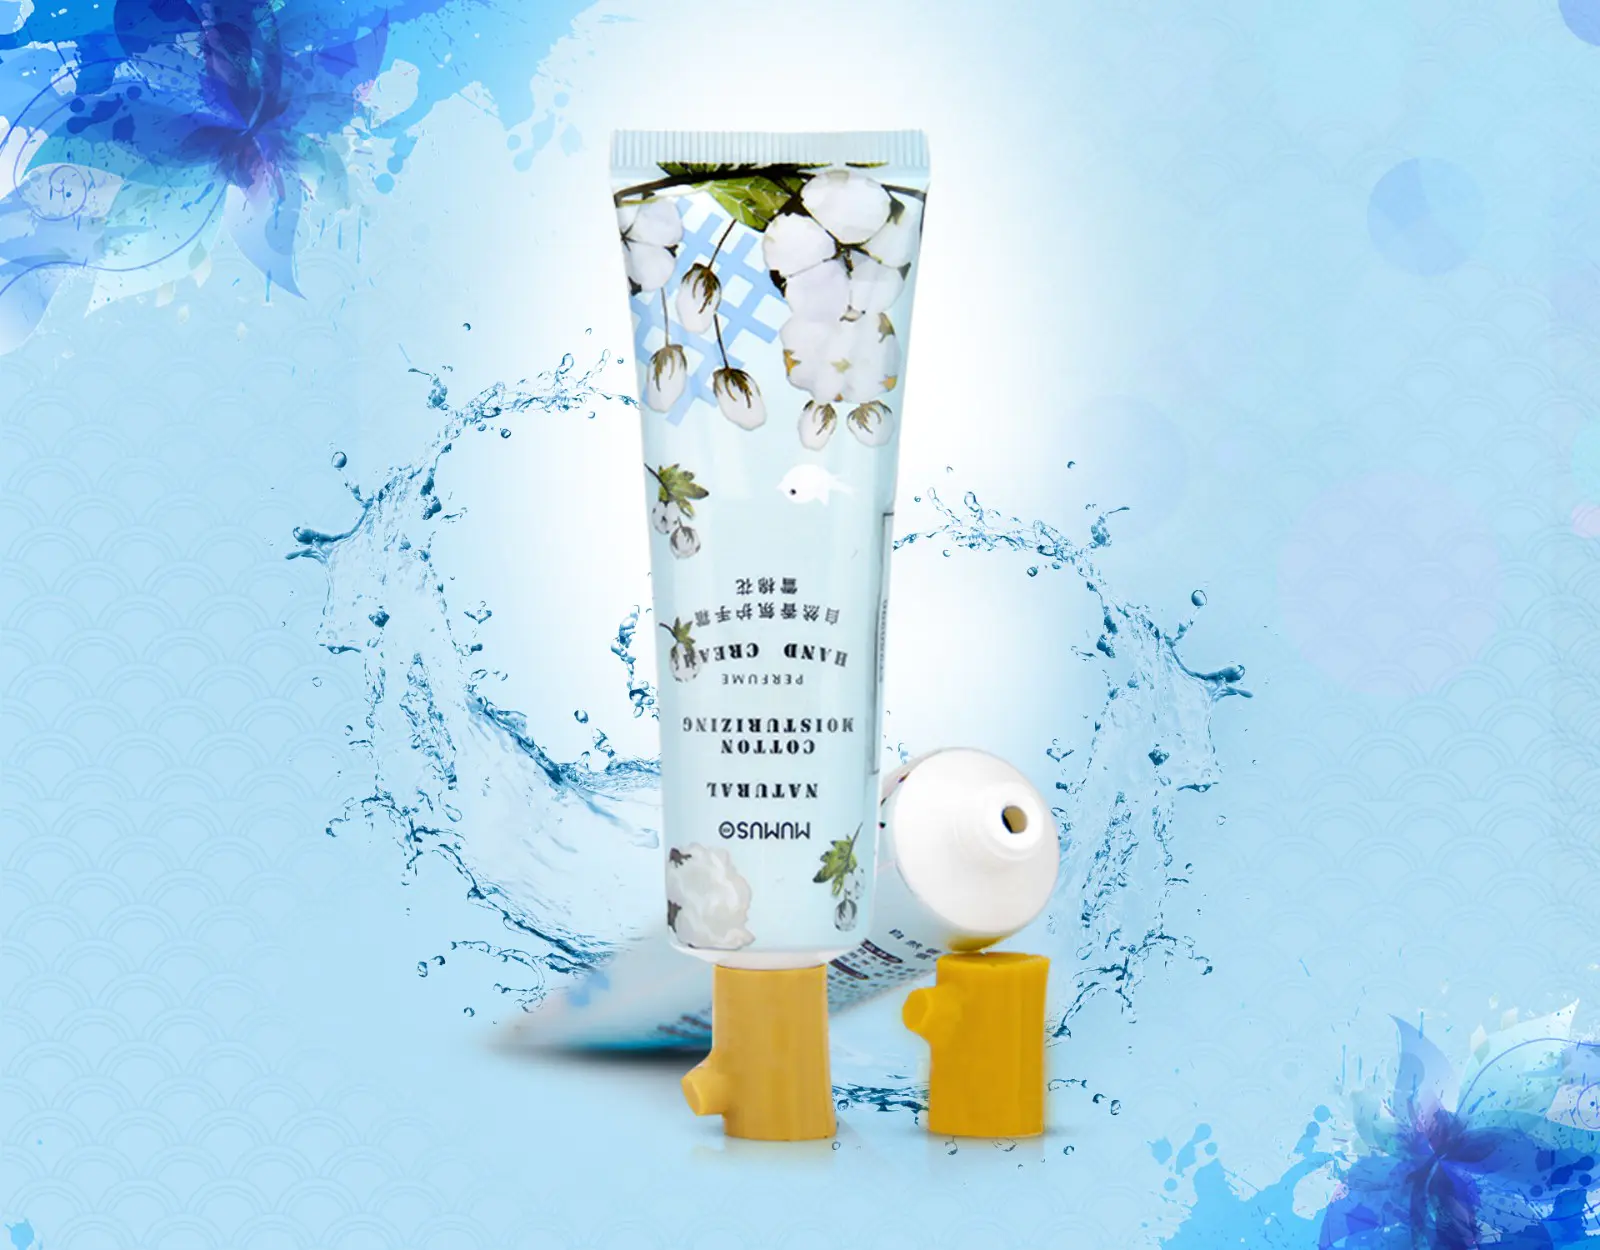 Lisson bulk production plastic tubes with caps chic design for cleanser